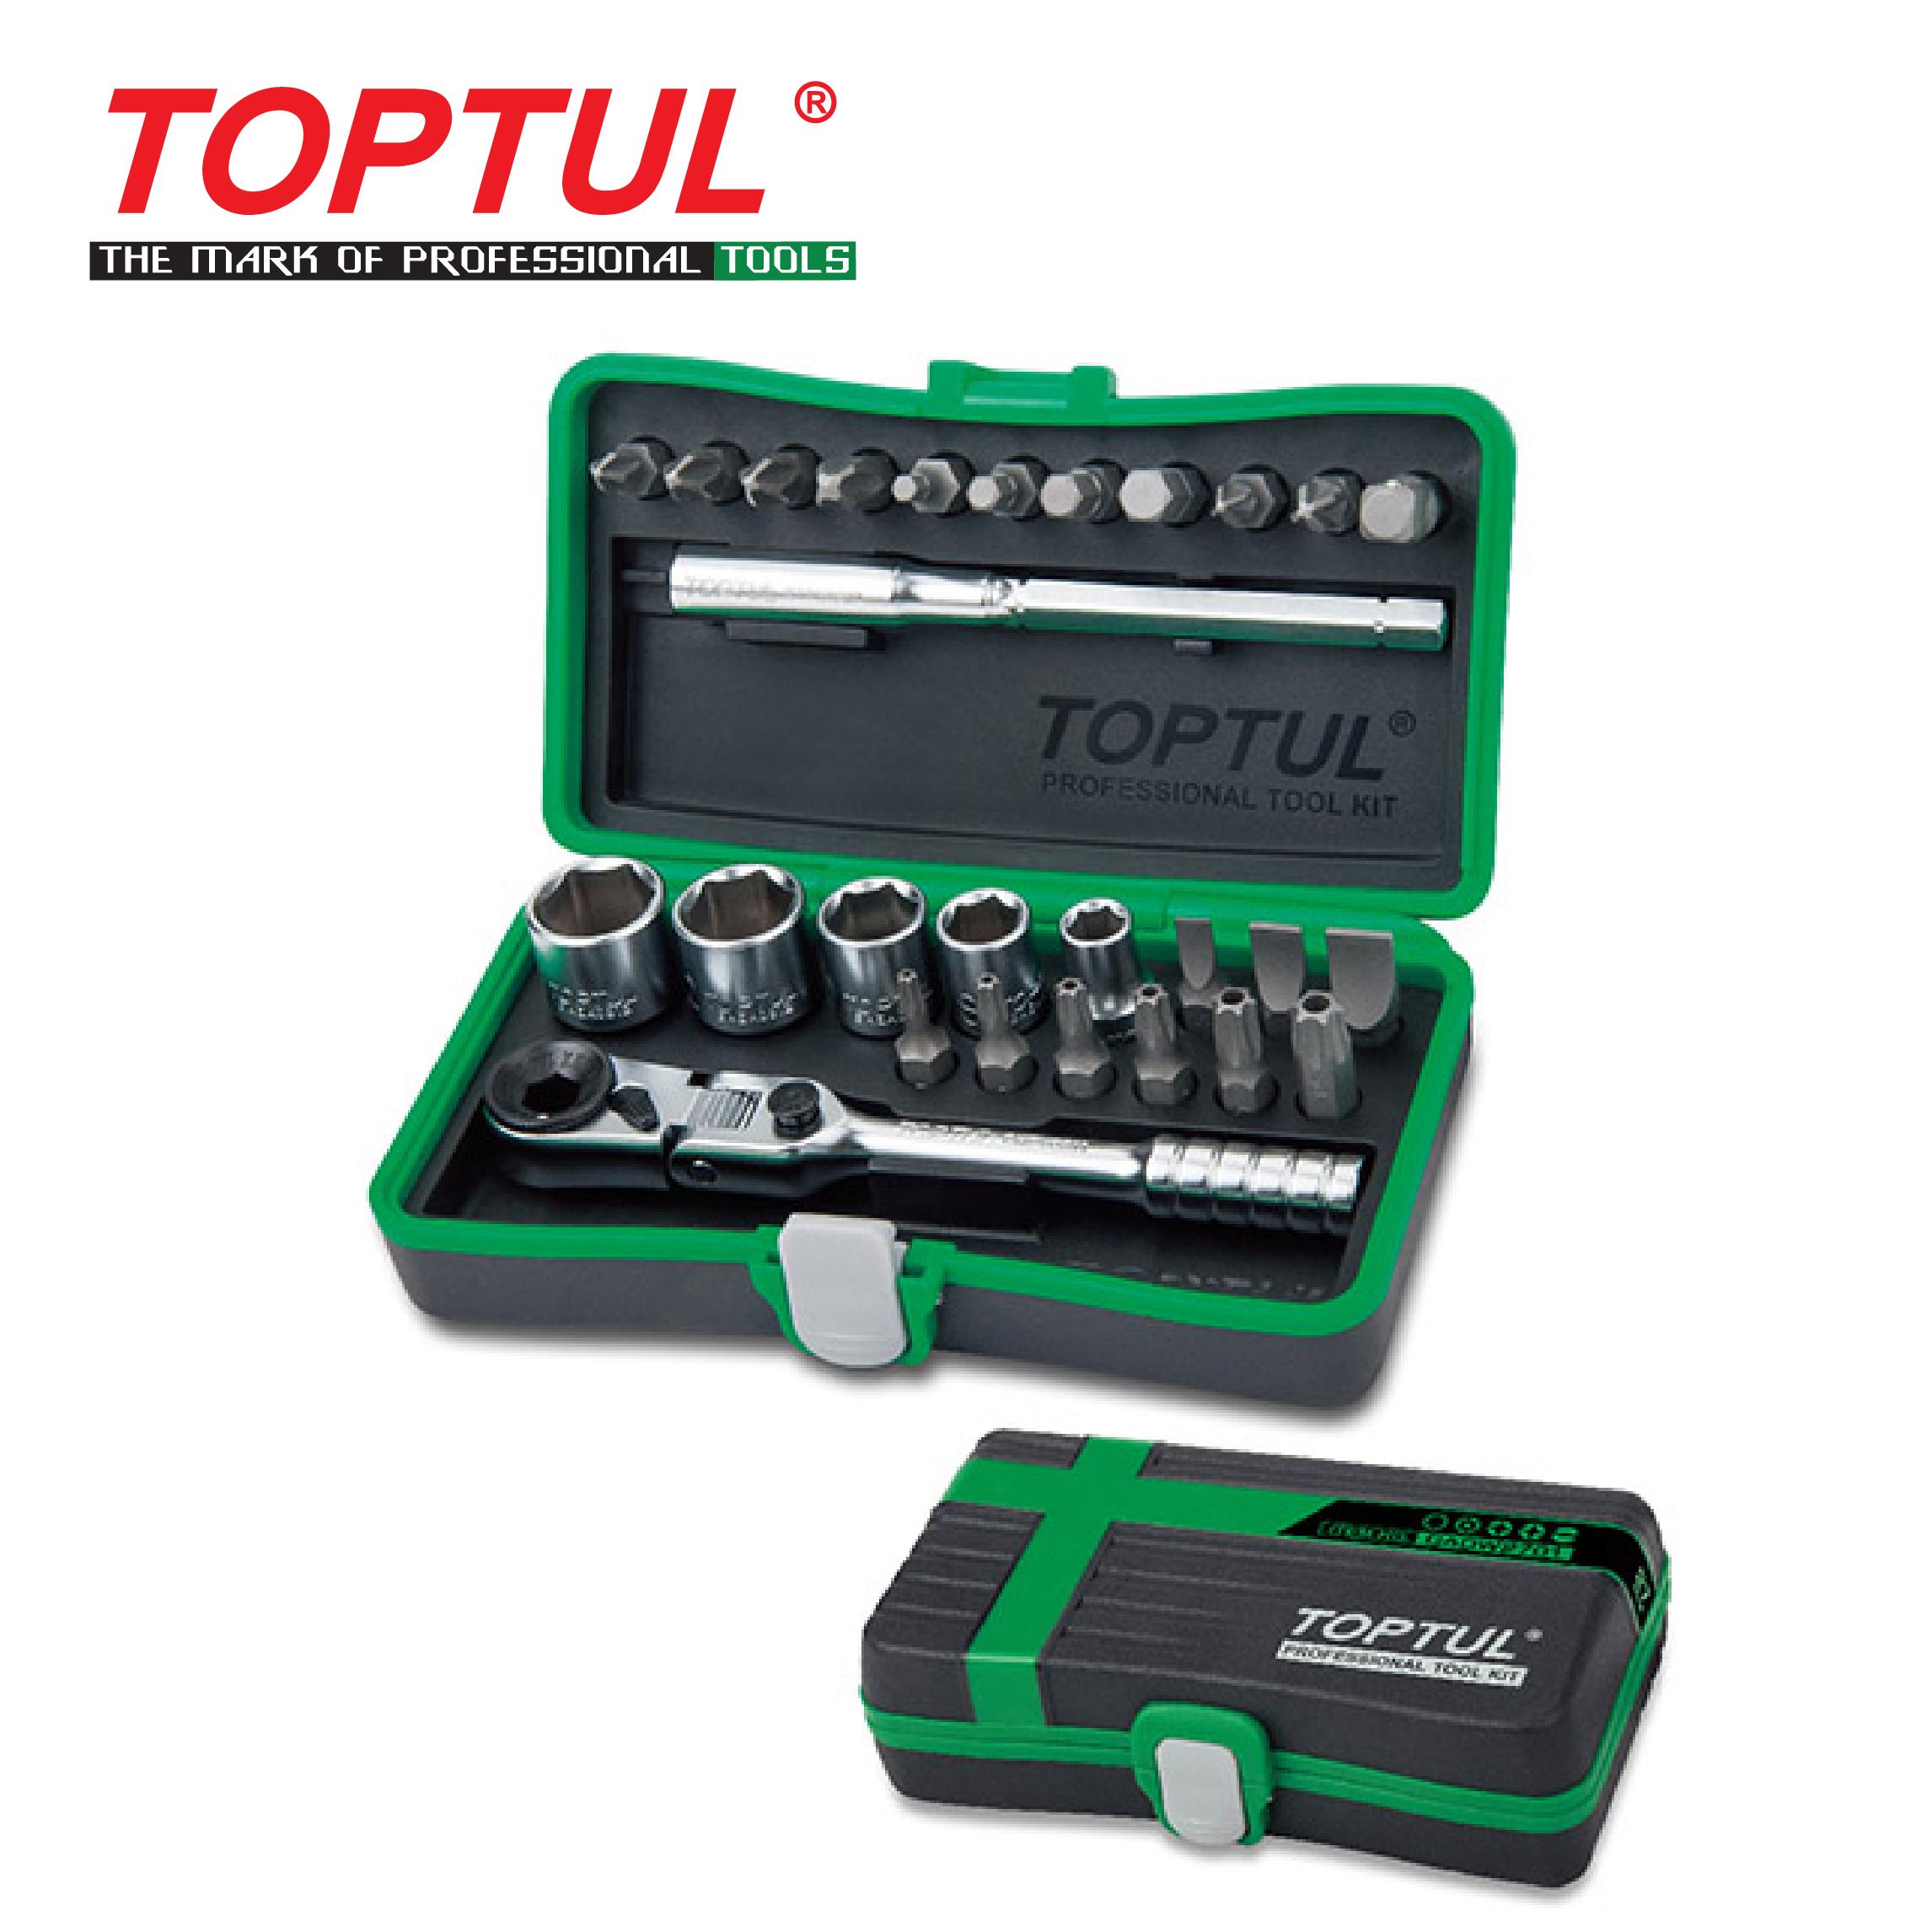 Toptul Professional 27 Piece 1/4"dr Metric Socket Set with Steel Case TTGCAD2701 